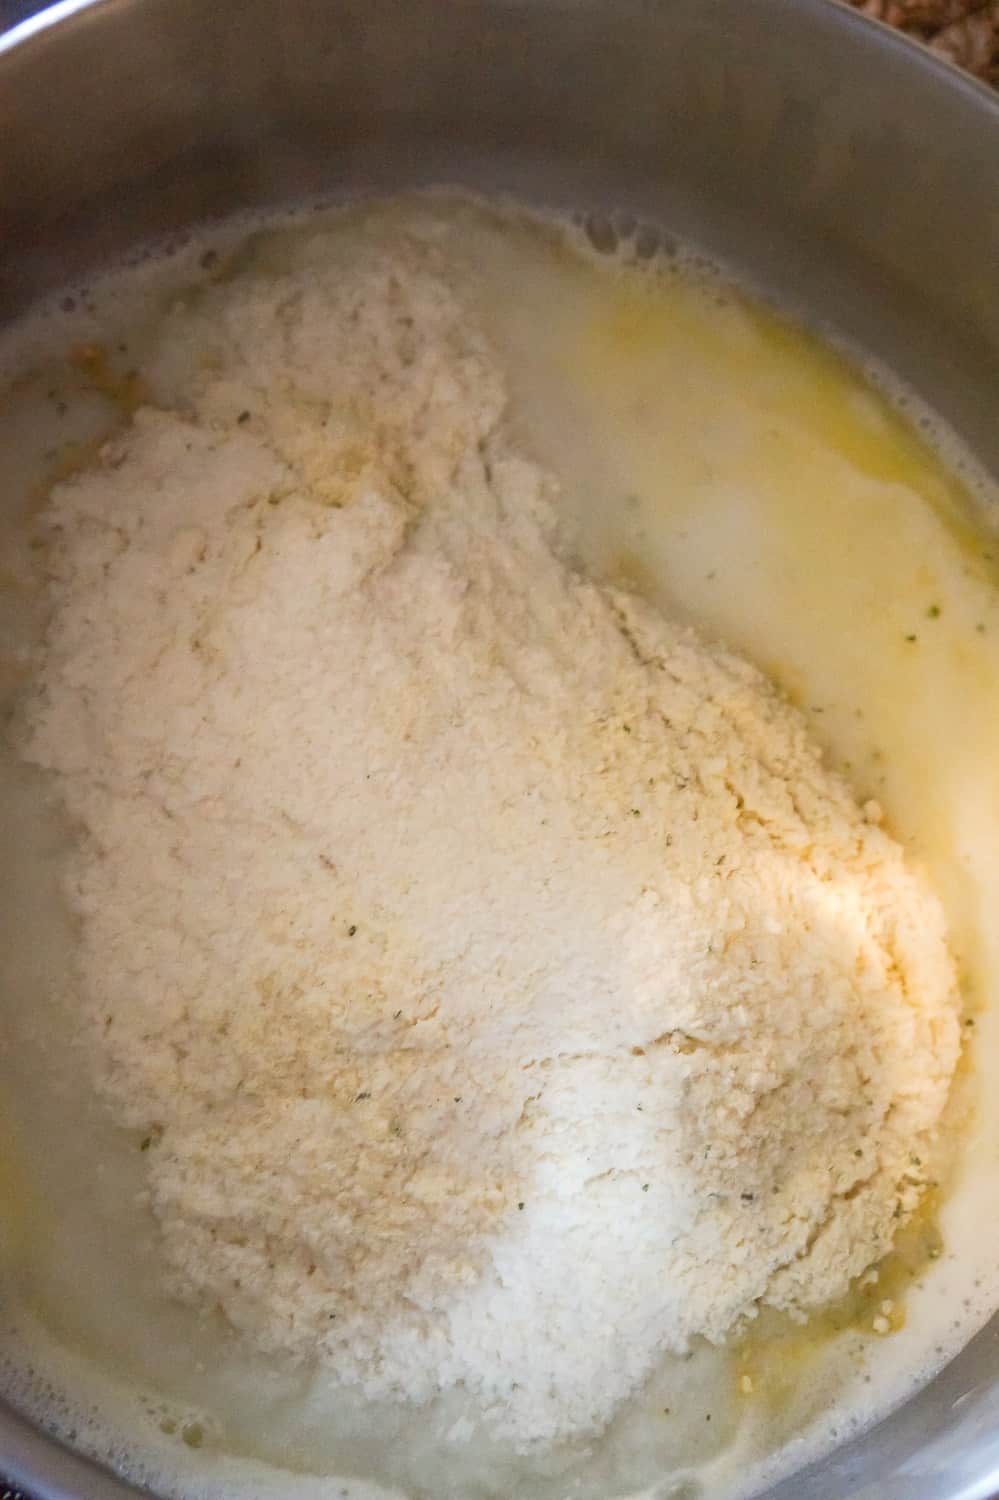 instant mashed potato powder on top of liquid in a pot